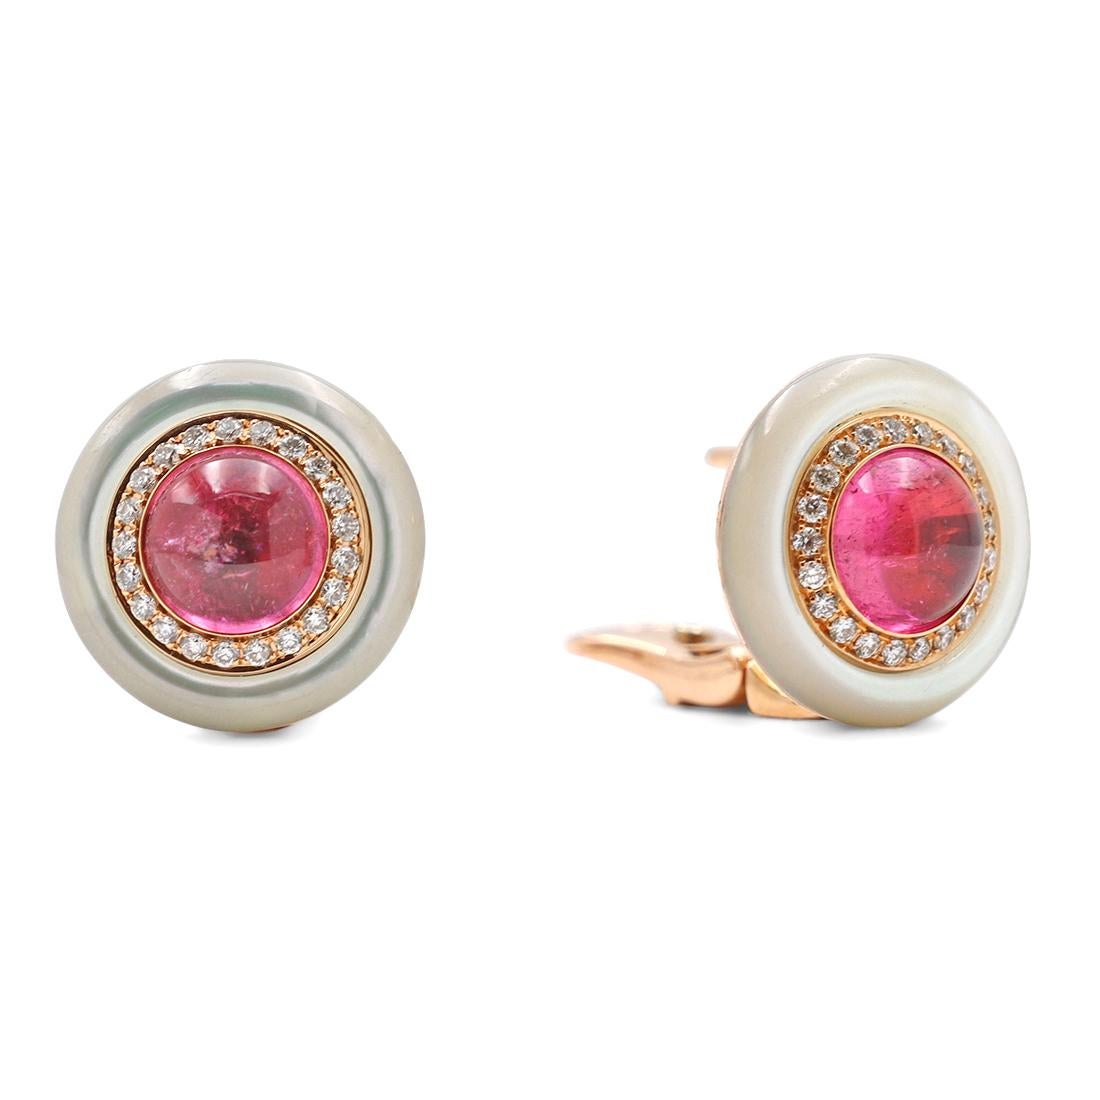 Authentic Bvlgari stud earrings crafted in 18 karat rose gold. The concentric circular design features an outer rim of mother of pearl, an inner rim of round brilliant cut diamonds, and centers of a cabochon pink tourmaline. The earrings measure